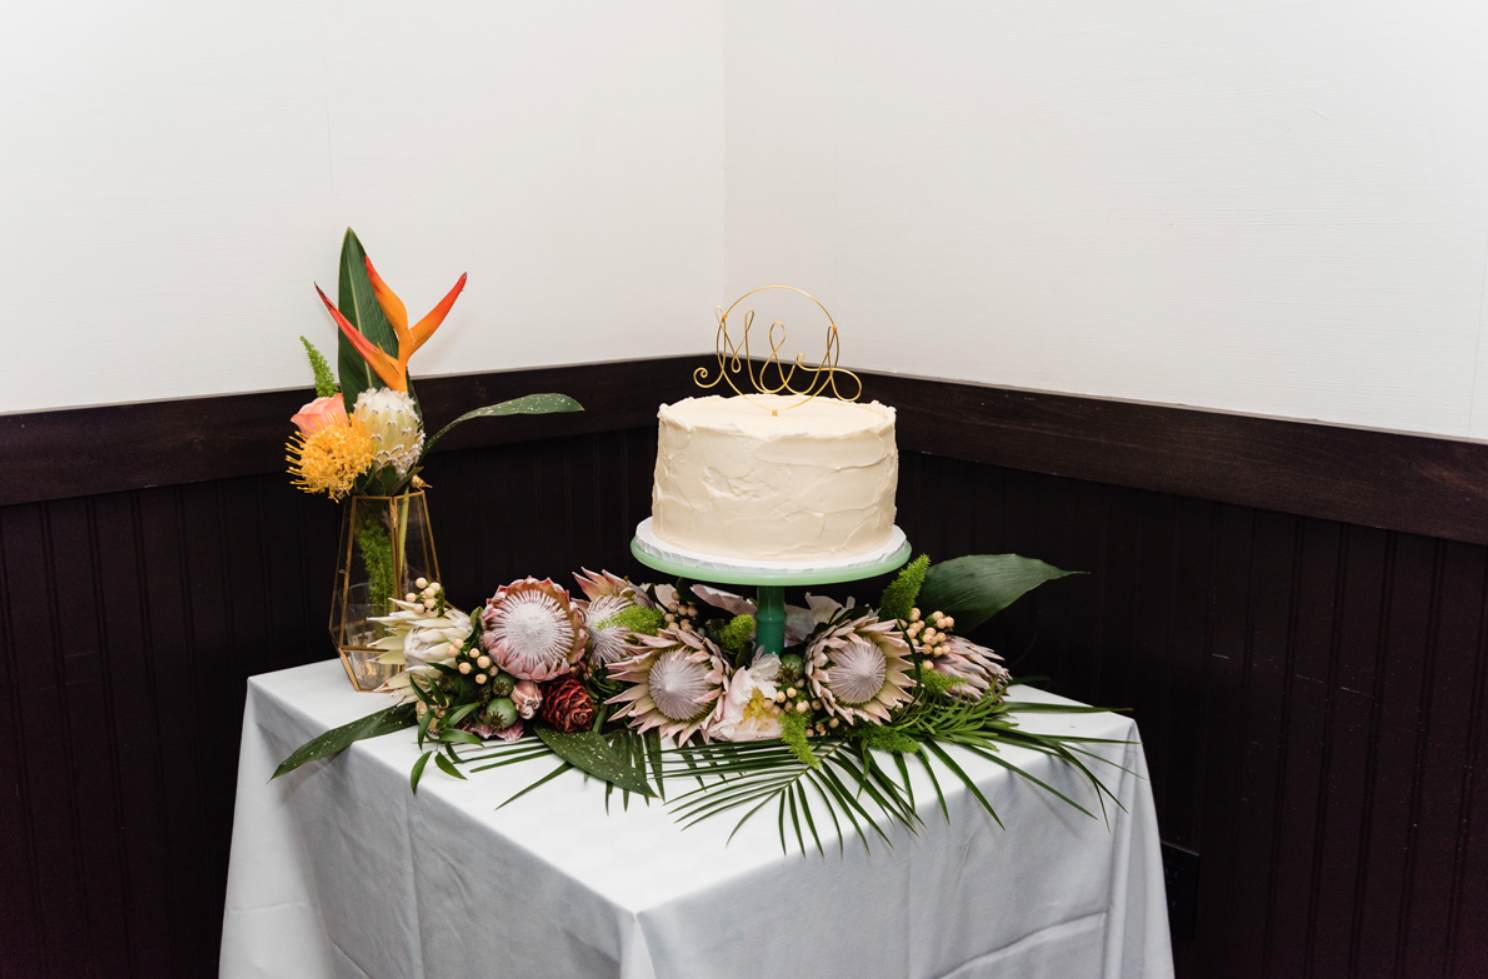 The wedding cake was a white one with a wire topper and served on king proteas